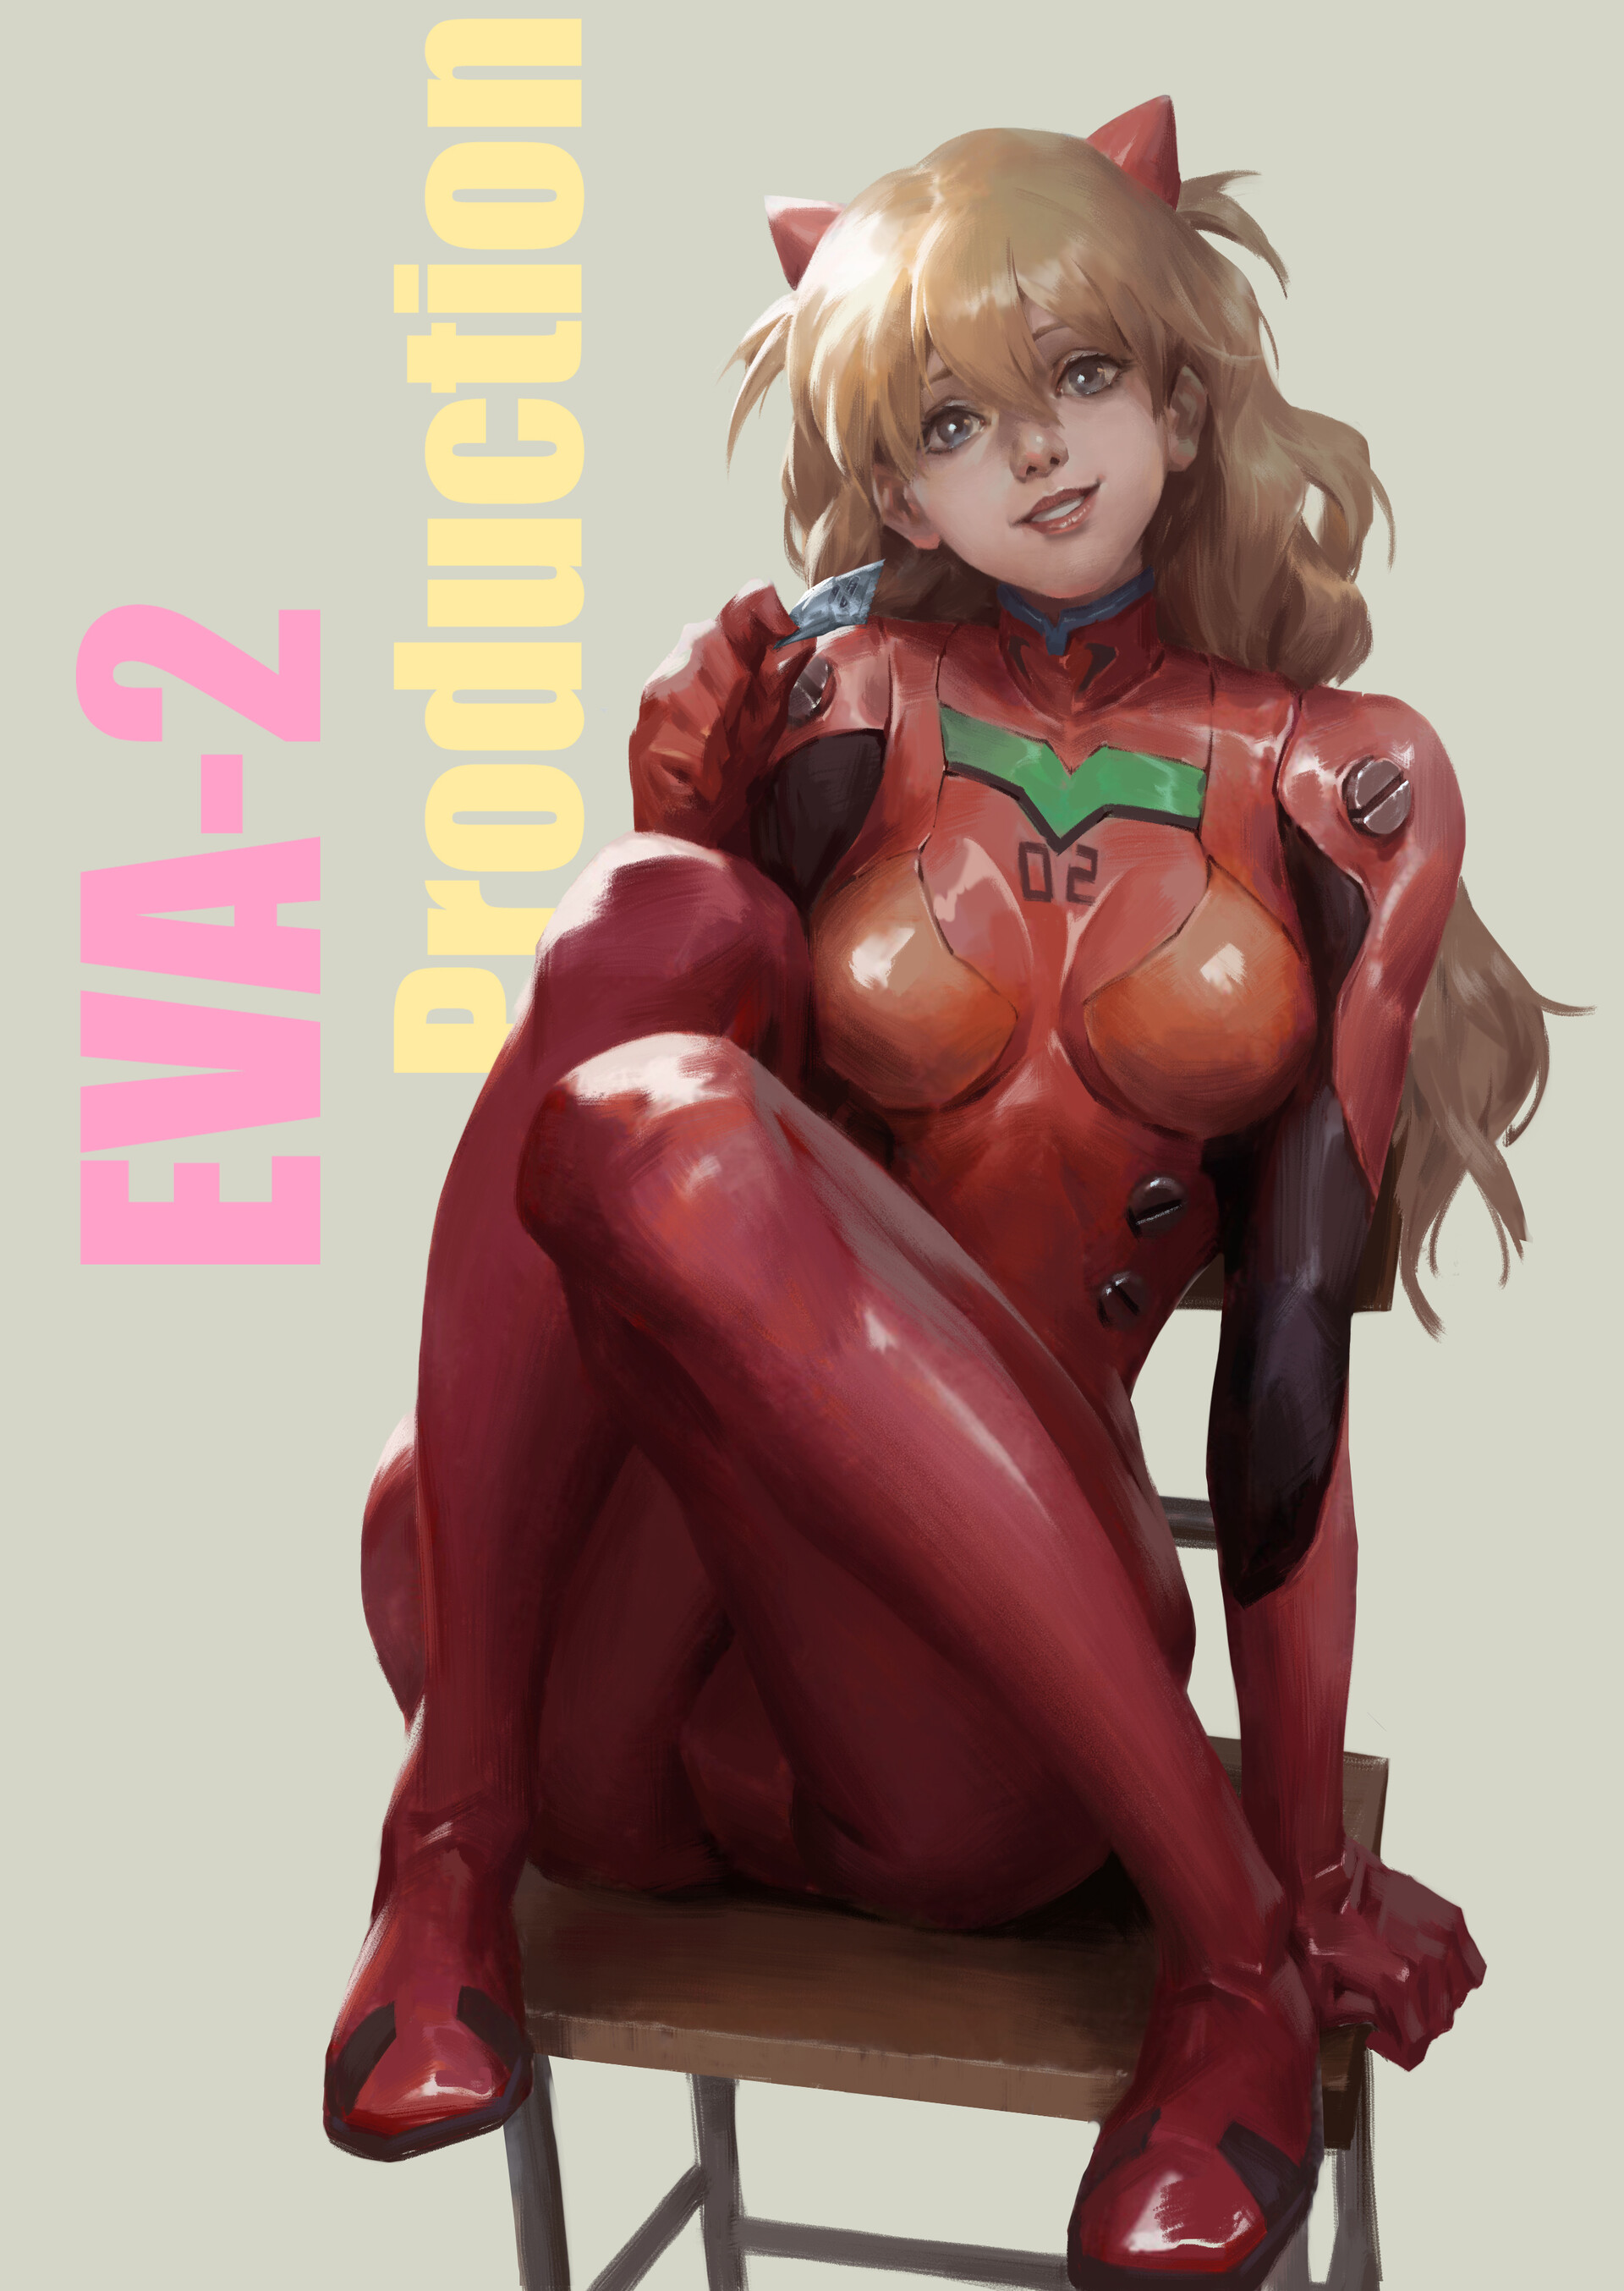 EVA-2 by Mario Feng Sex Images Hq